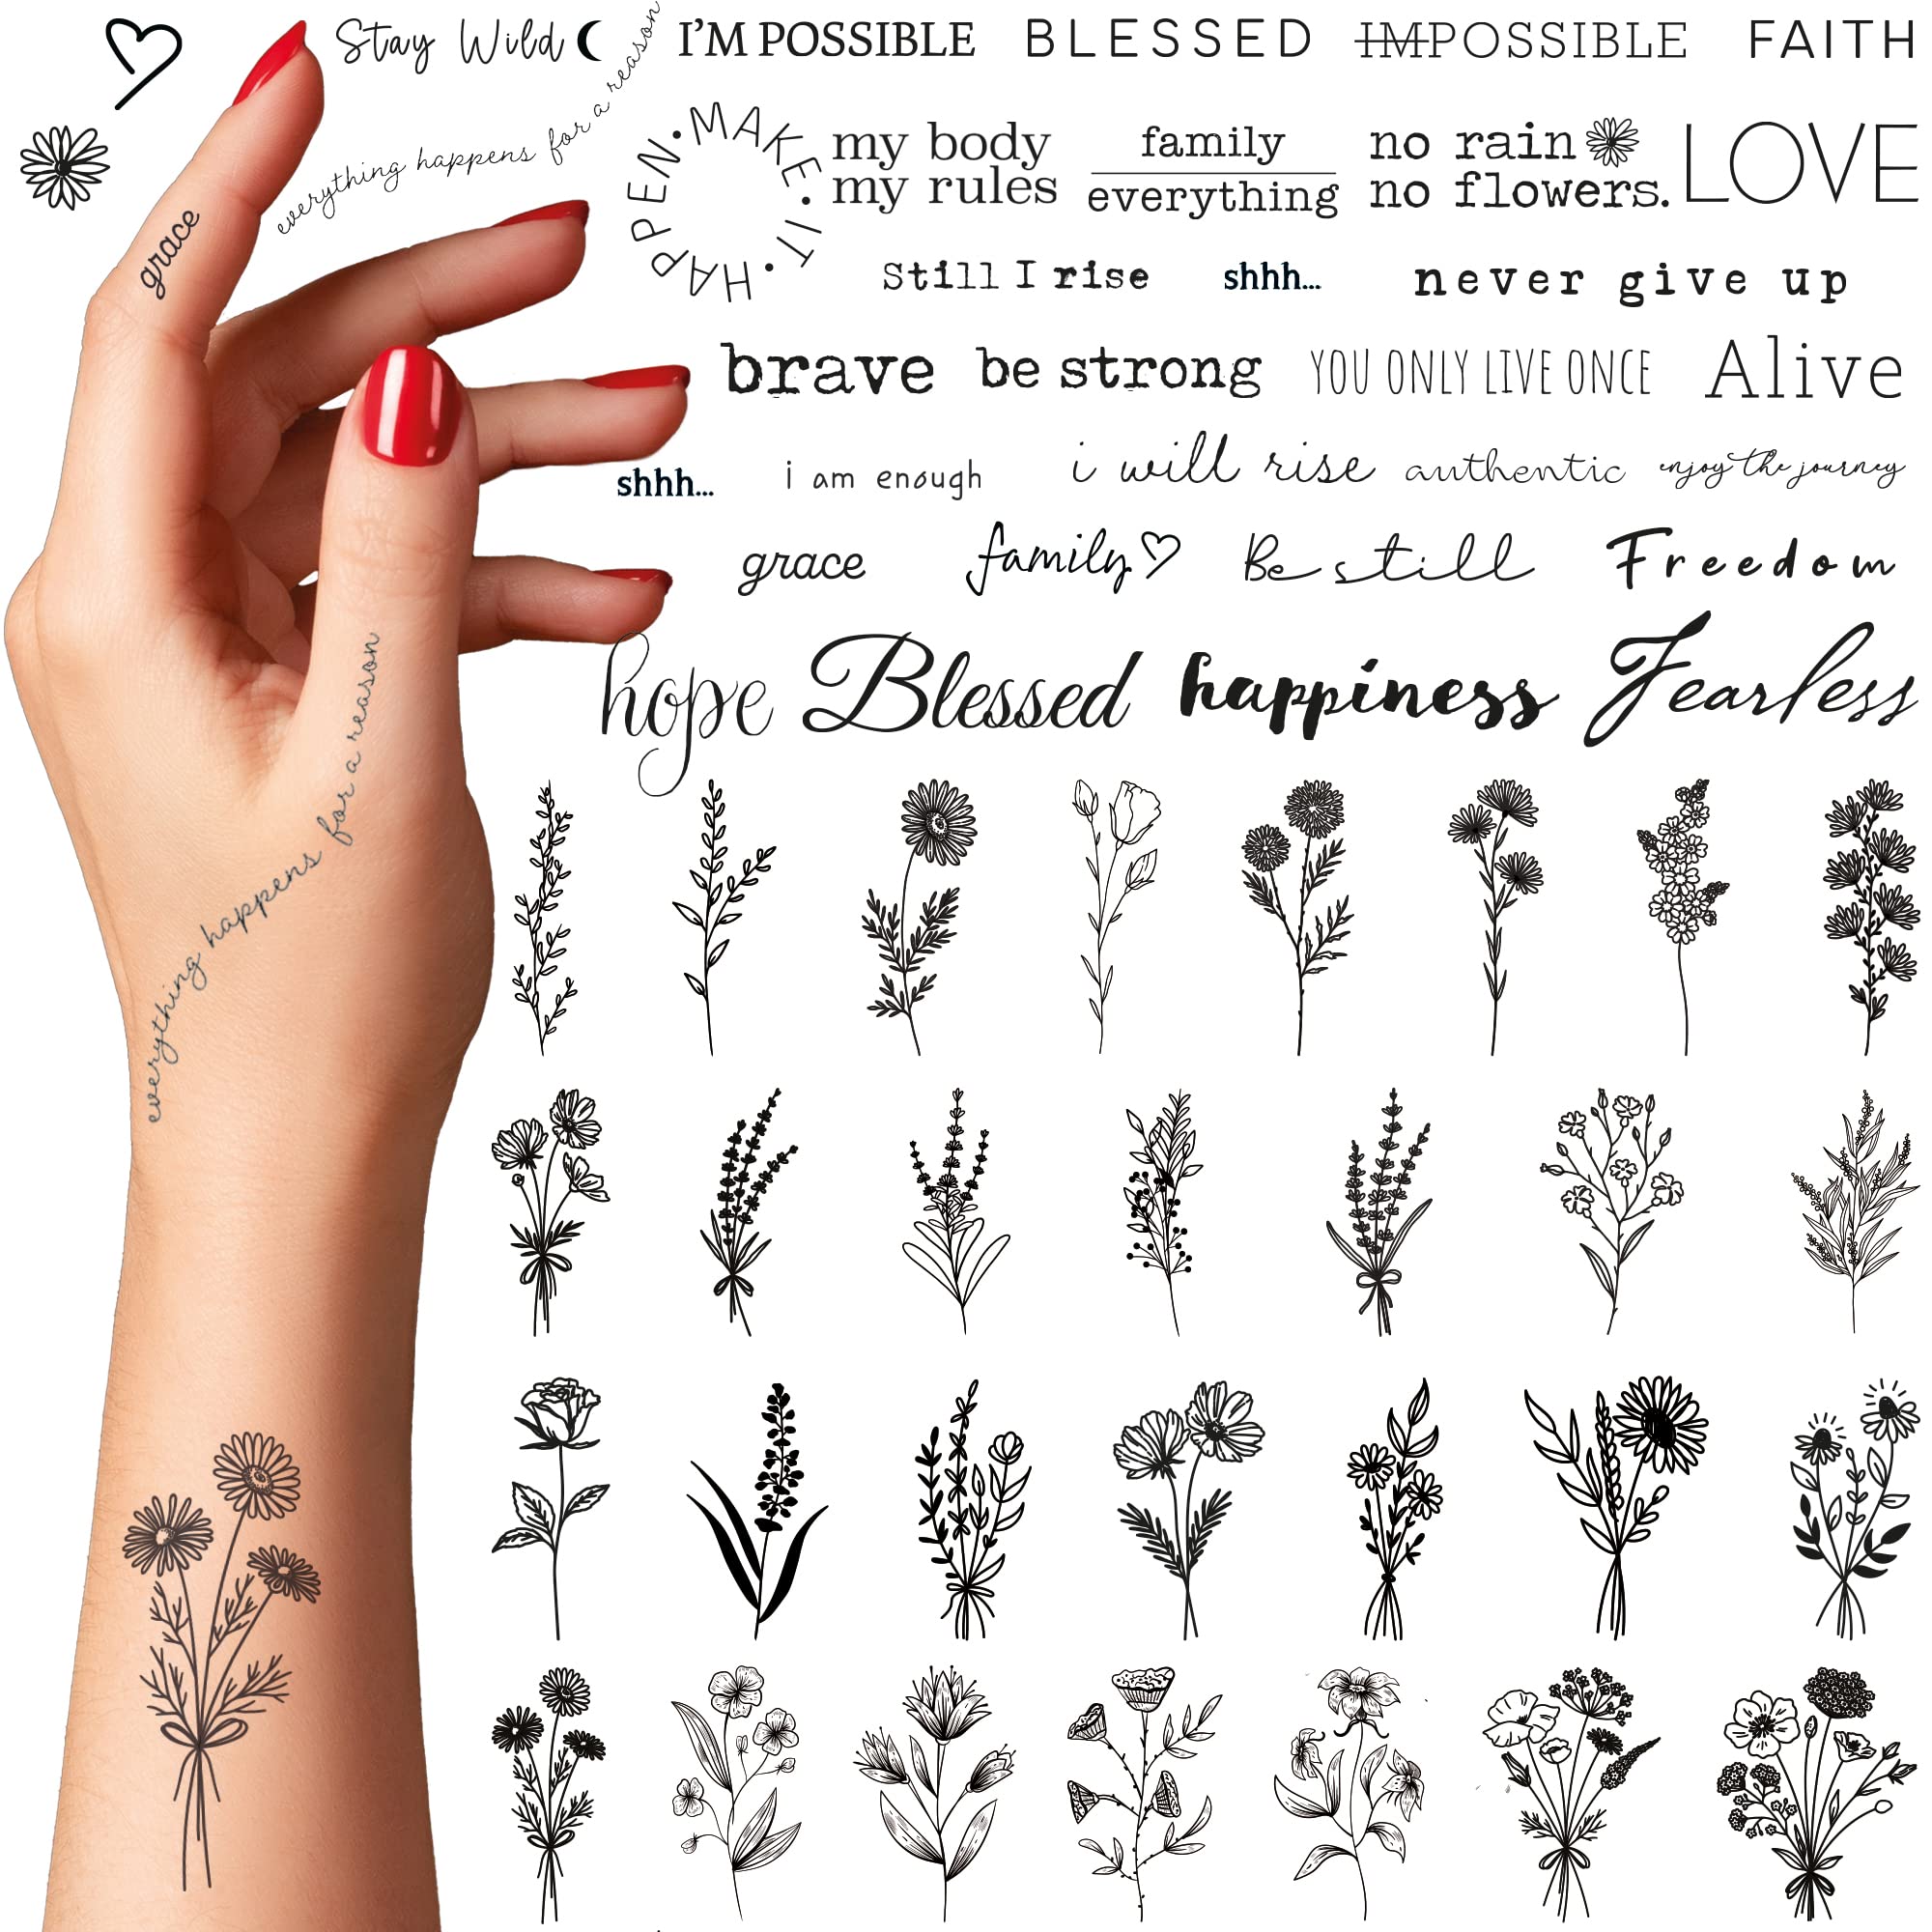 Temporary Tattoos For Women -110 Temporary Tattoo Stickers Of Flowers &  Phrases- Fake Tattoos Temporary Realistic & Aesthetic - Tatoos For Women &  Tatoos For Adults - Tatuajes Temporales Women Unisex